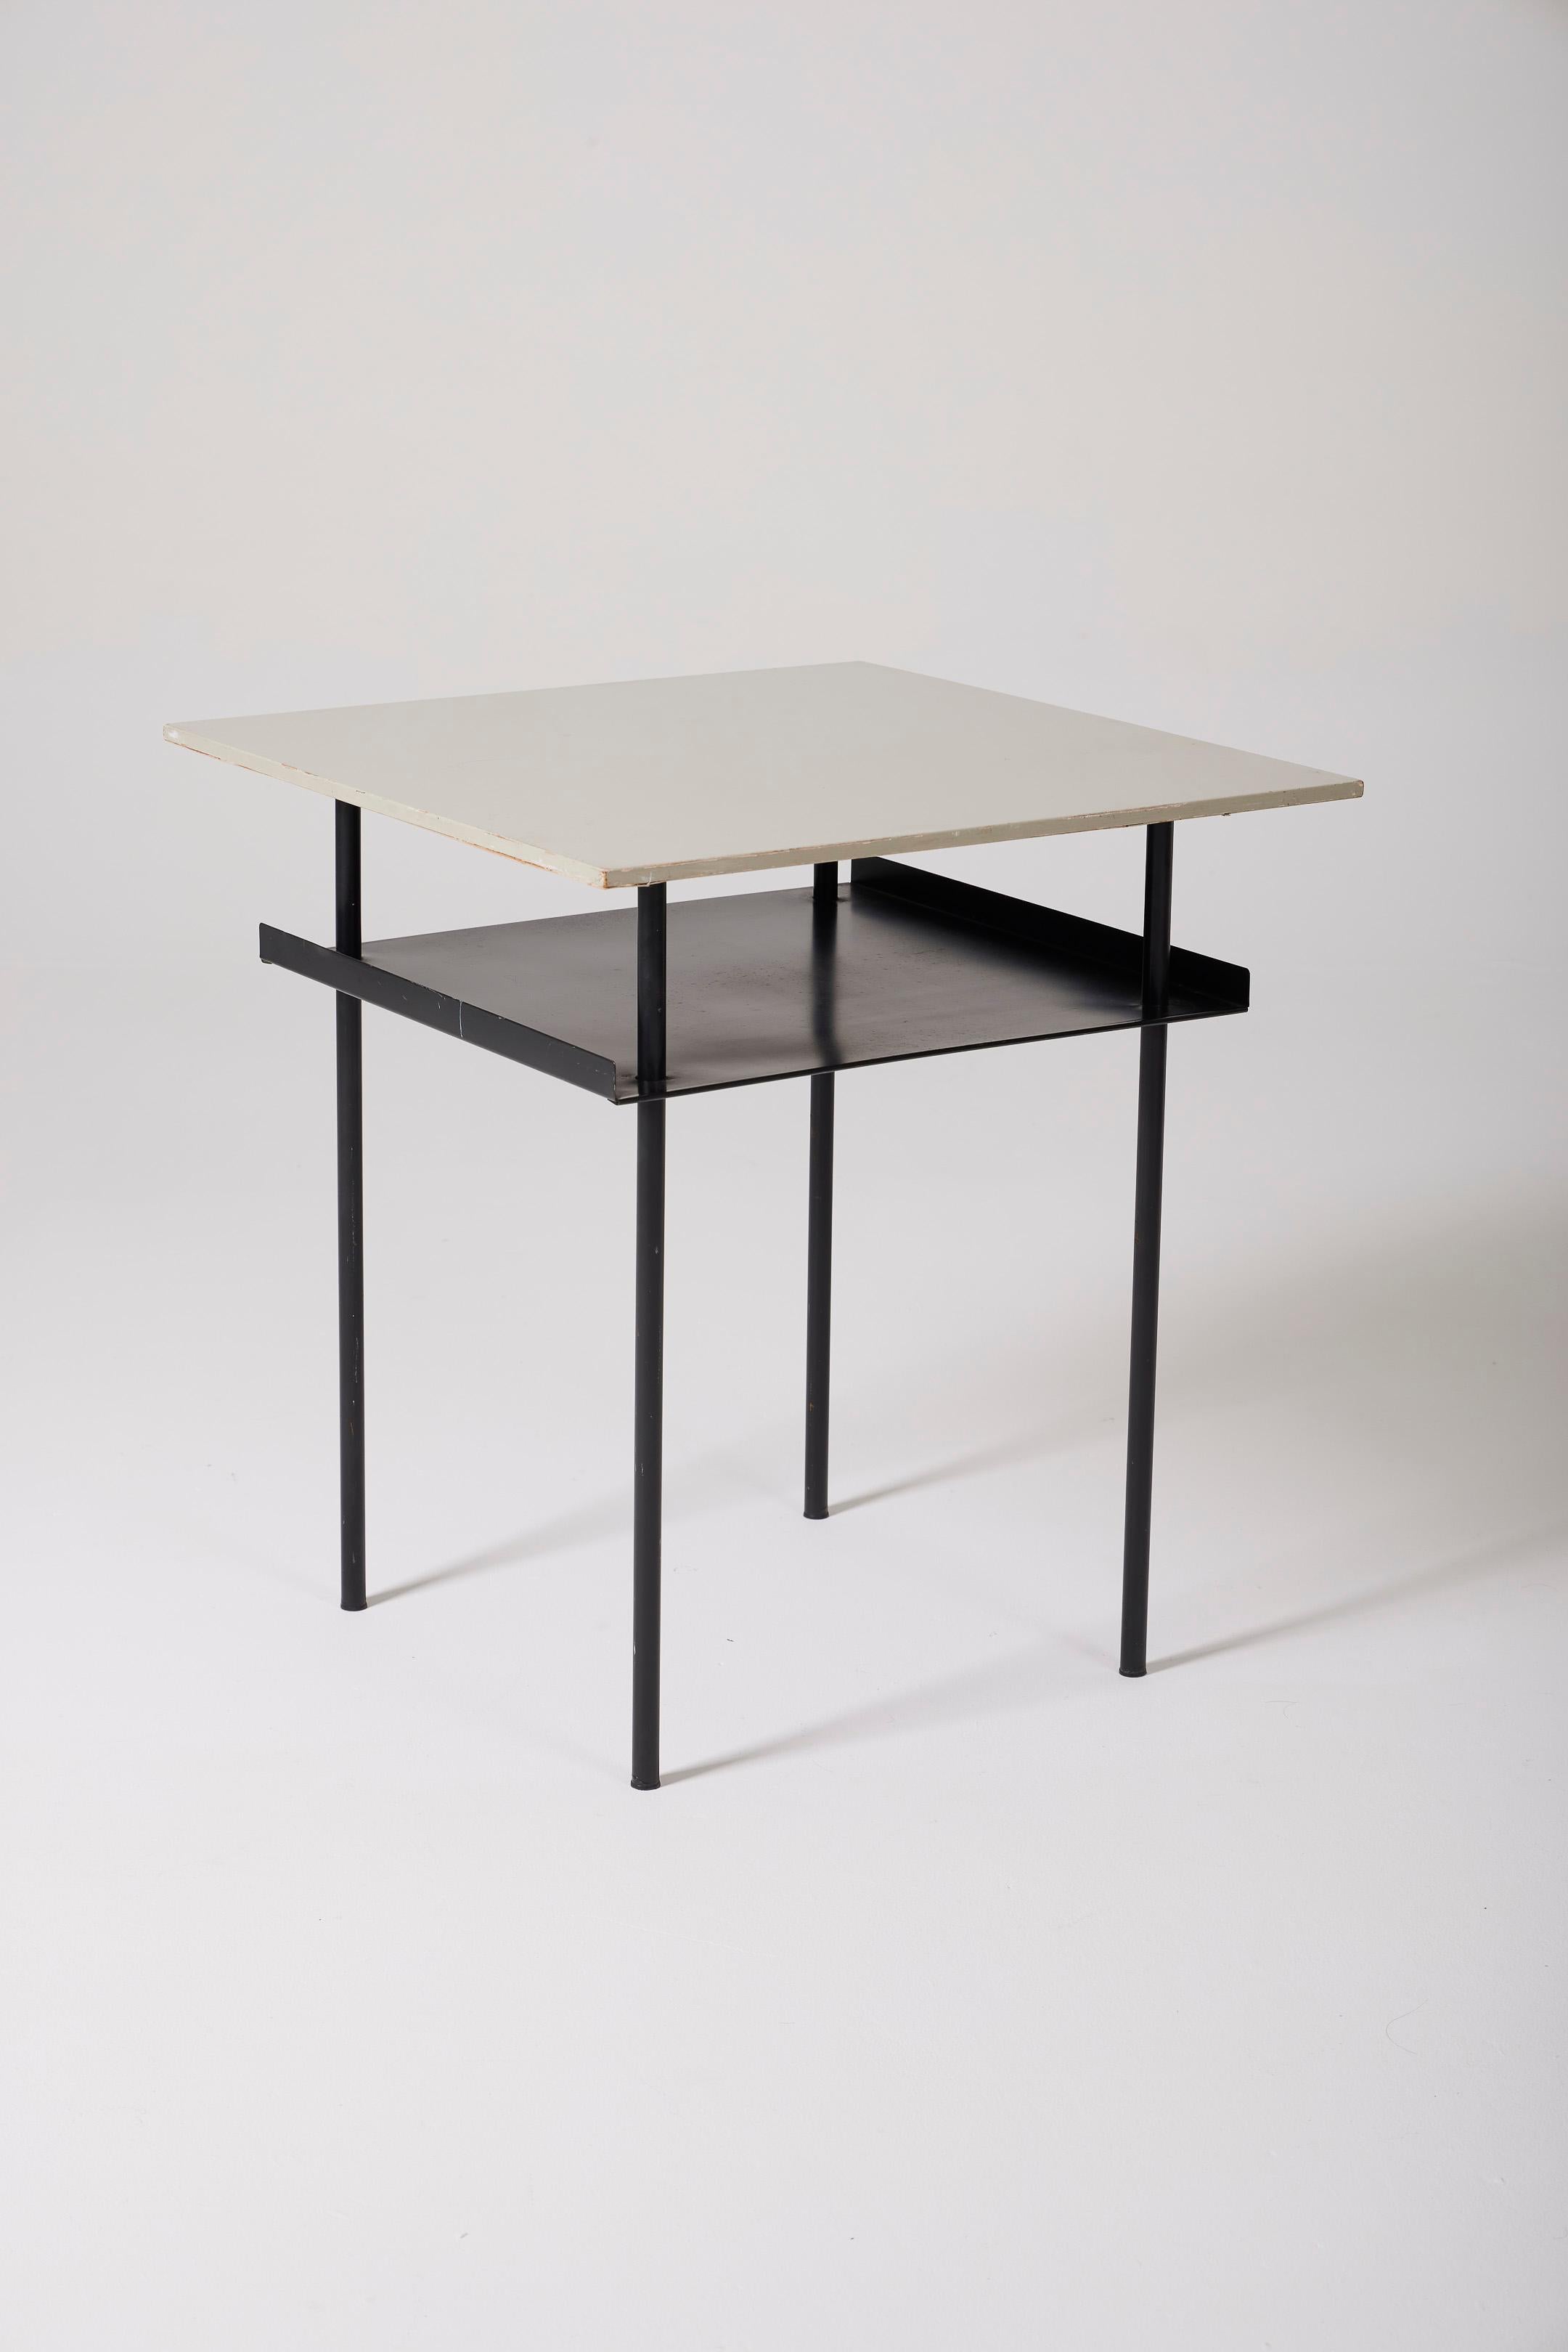  Side table by Dutch designer Wim Rietveld (1924-1985) in the 1950s. The table features a white lacquered wooden top and a black lacquered metal tubular structure. It includes an additional shelf under the top, making this coffee table very